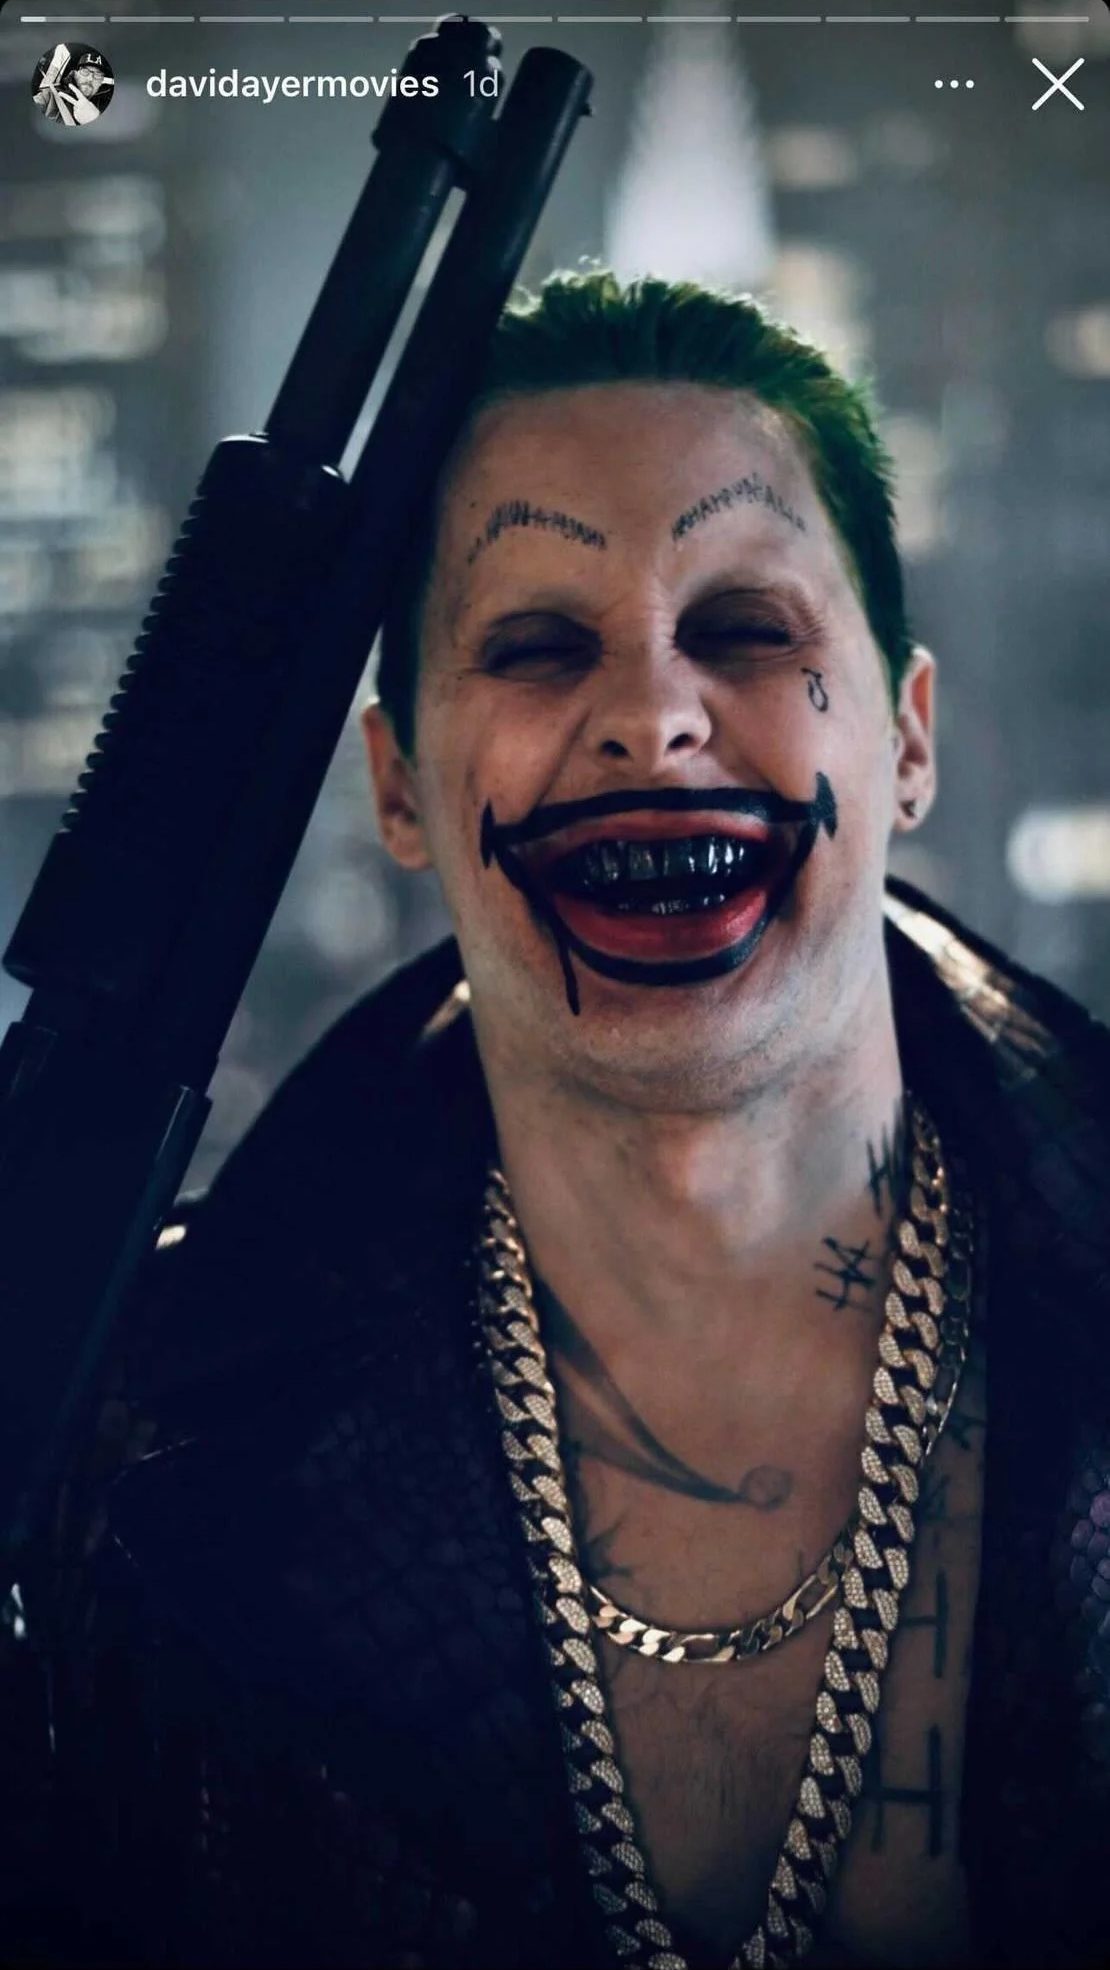 An early Joker from the David Ayer Suicide Squad film